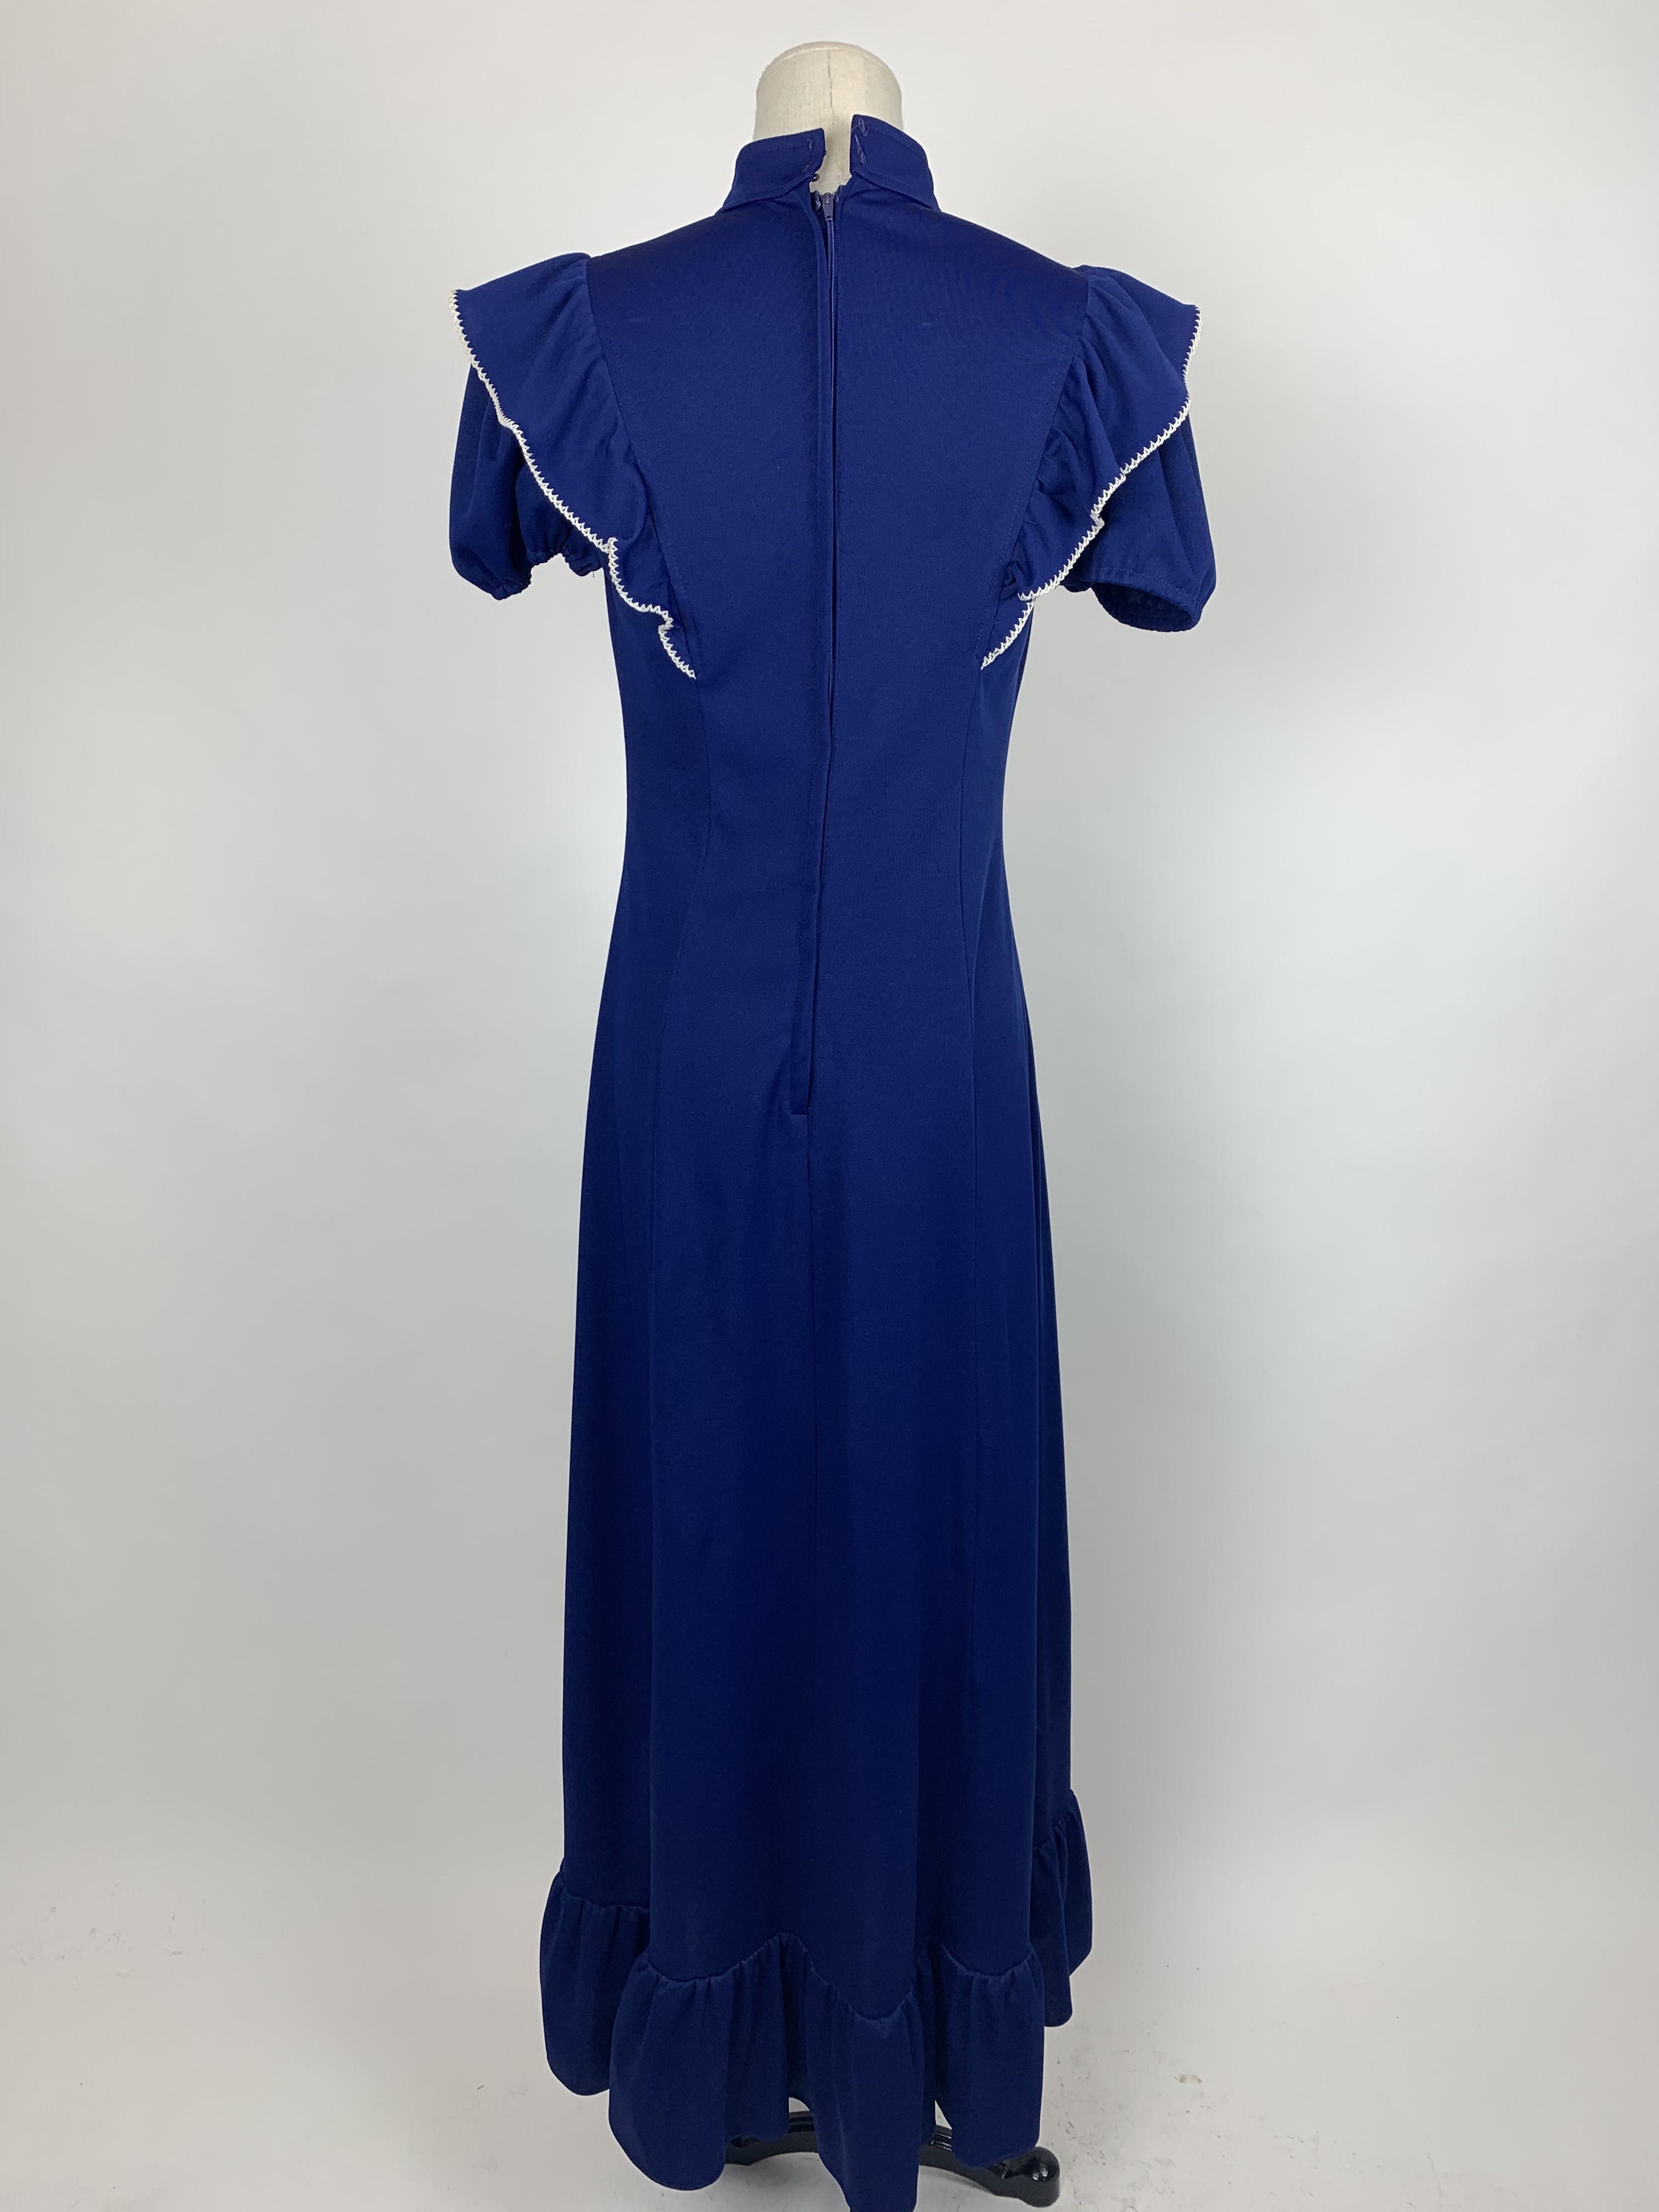 Vintage 70's Western Style Maxi Dress | Shop THRILLING